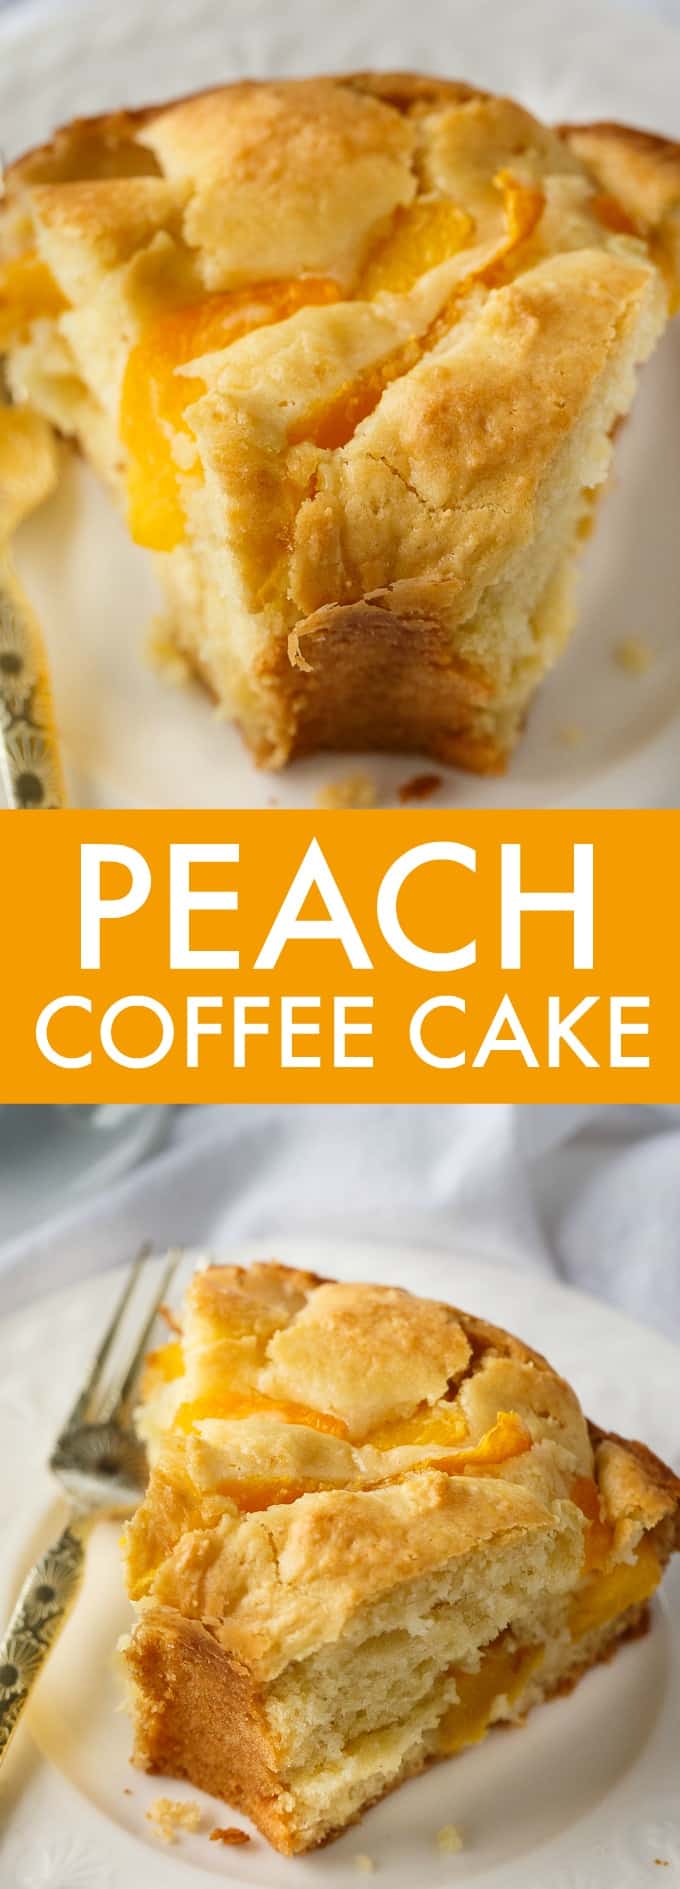 Peach Coffee Cake - A fruity cake that's great for breakfast or a snack. No fresh peaches required for a year-round treat.